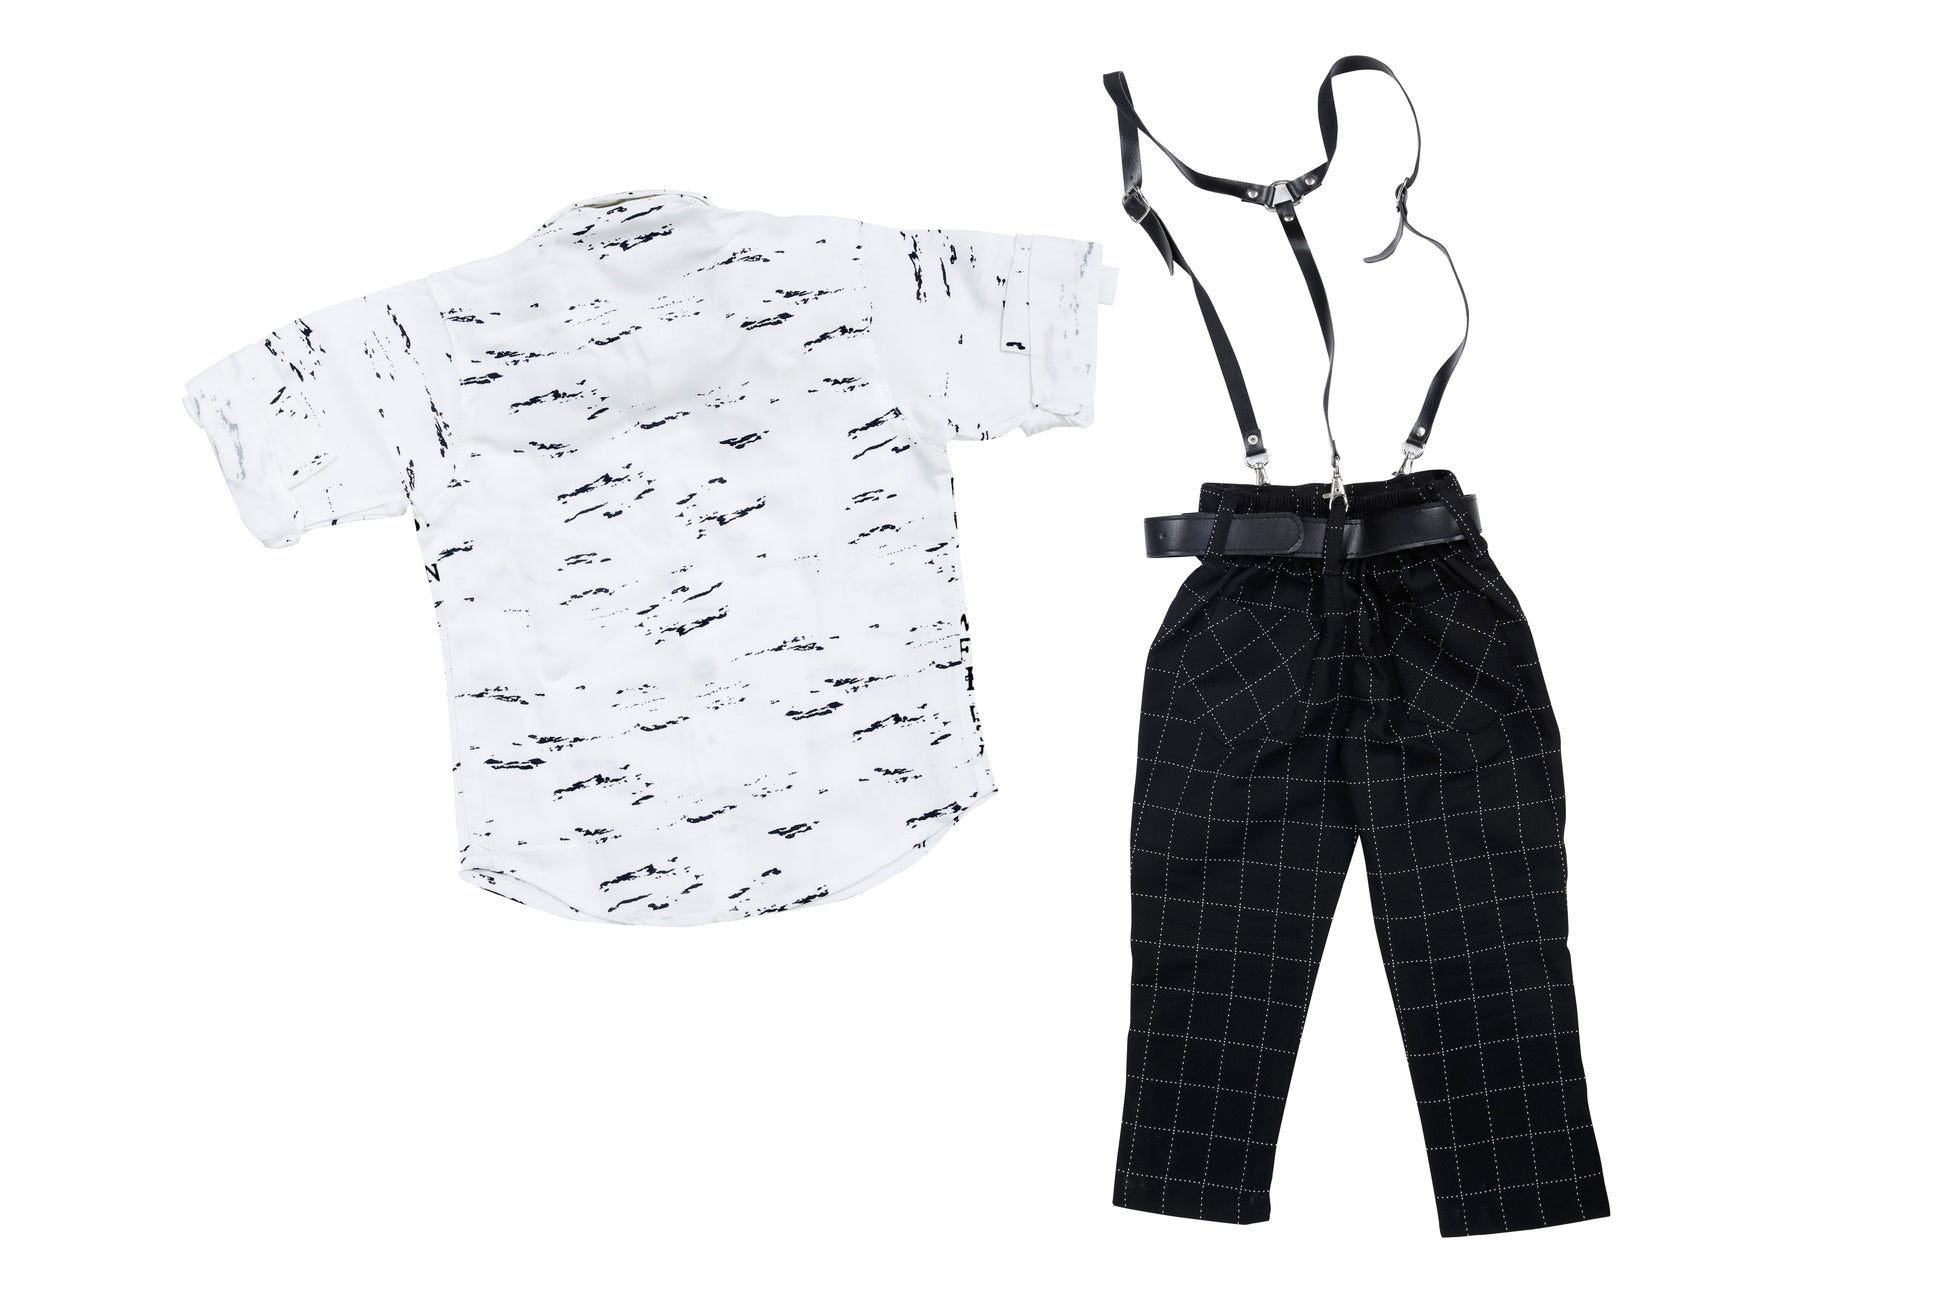 Bad Boys printed party Outfit with Suspenders and a Bow. - mashup boys